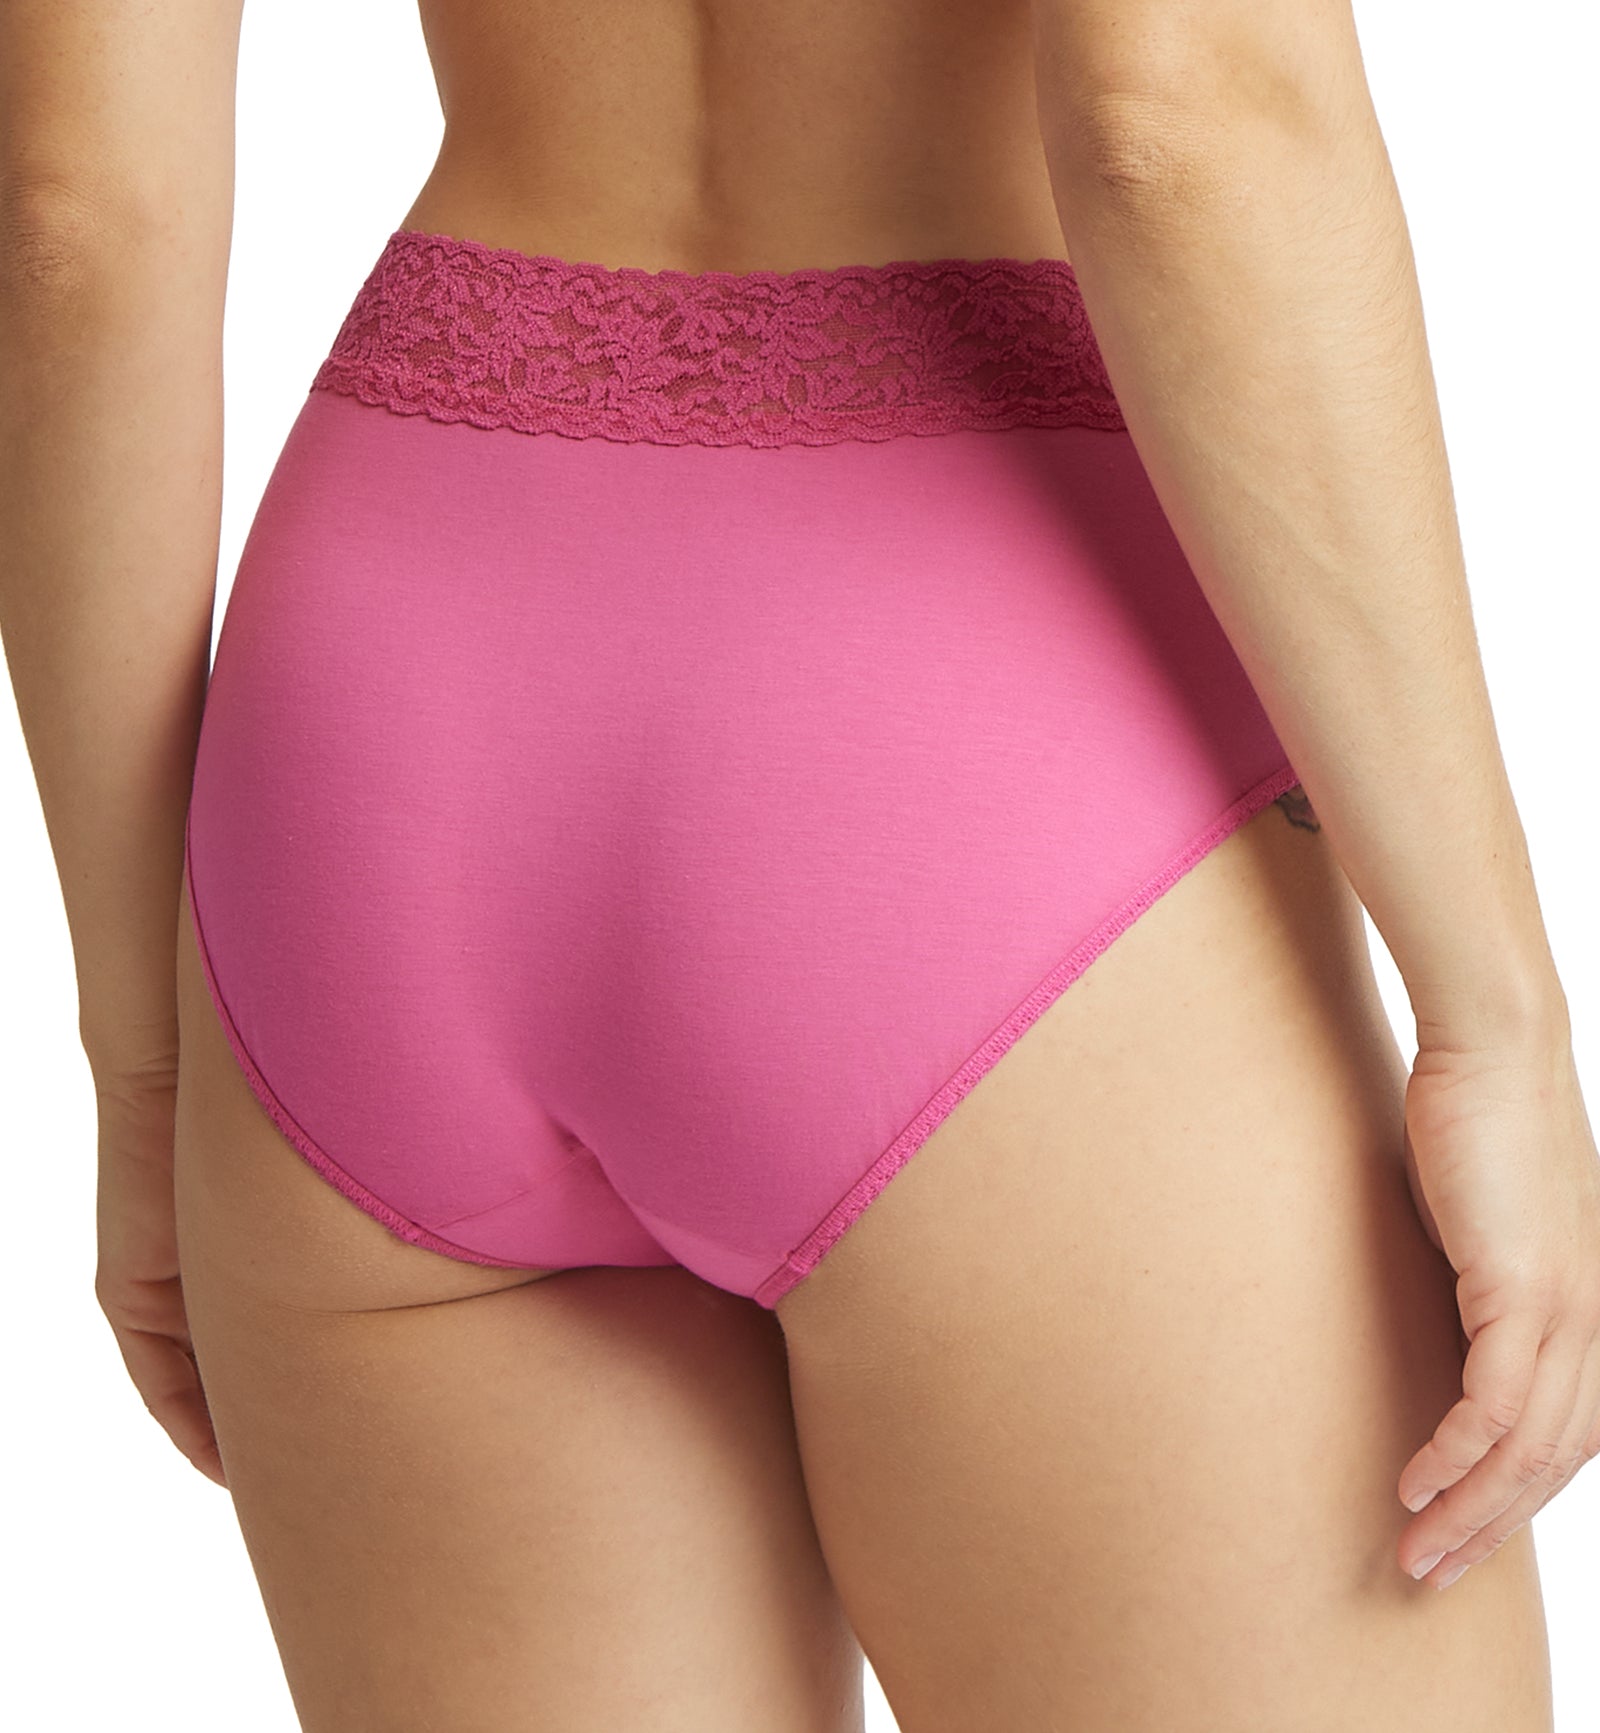 Hanky Panky Cotton French Brief with Lace (892461),Small,Wild Pink - Wild Pink,Small